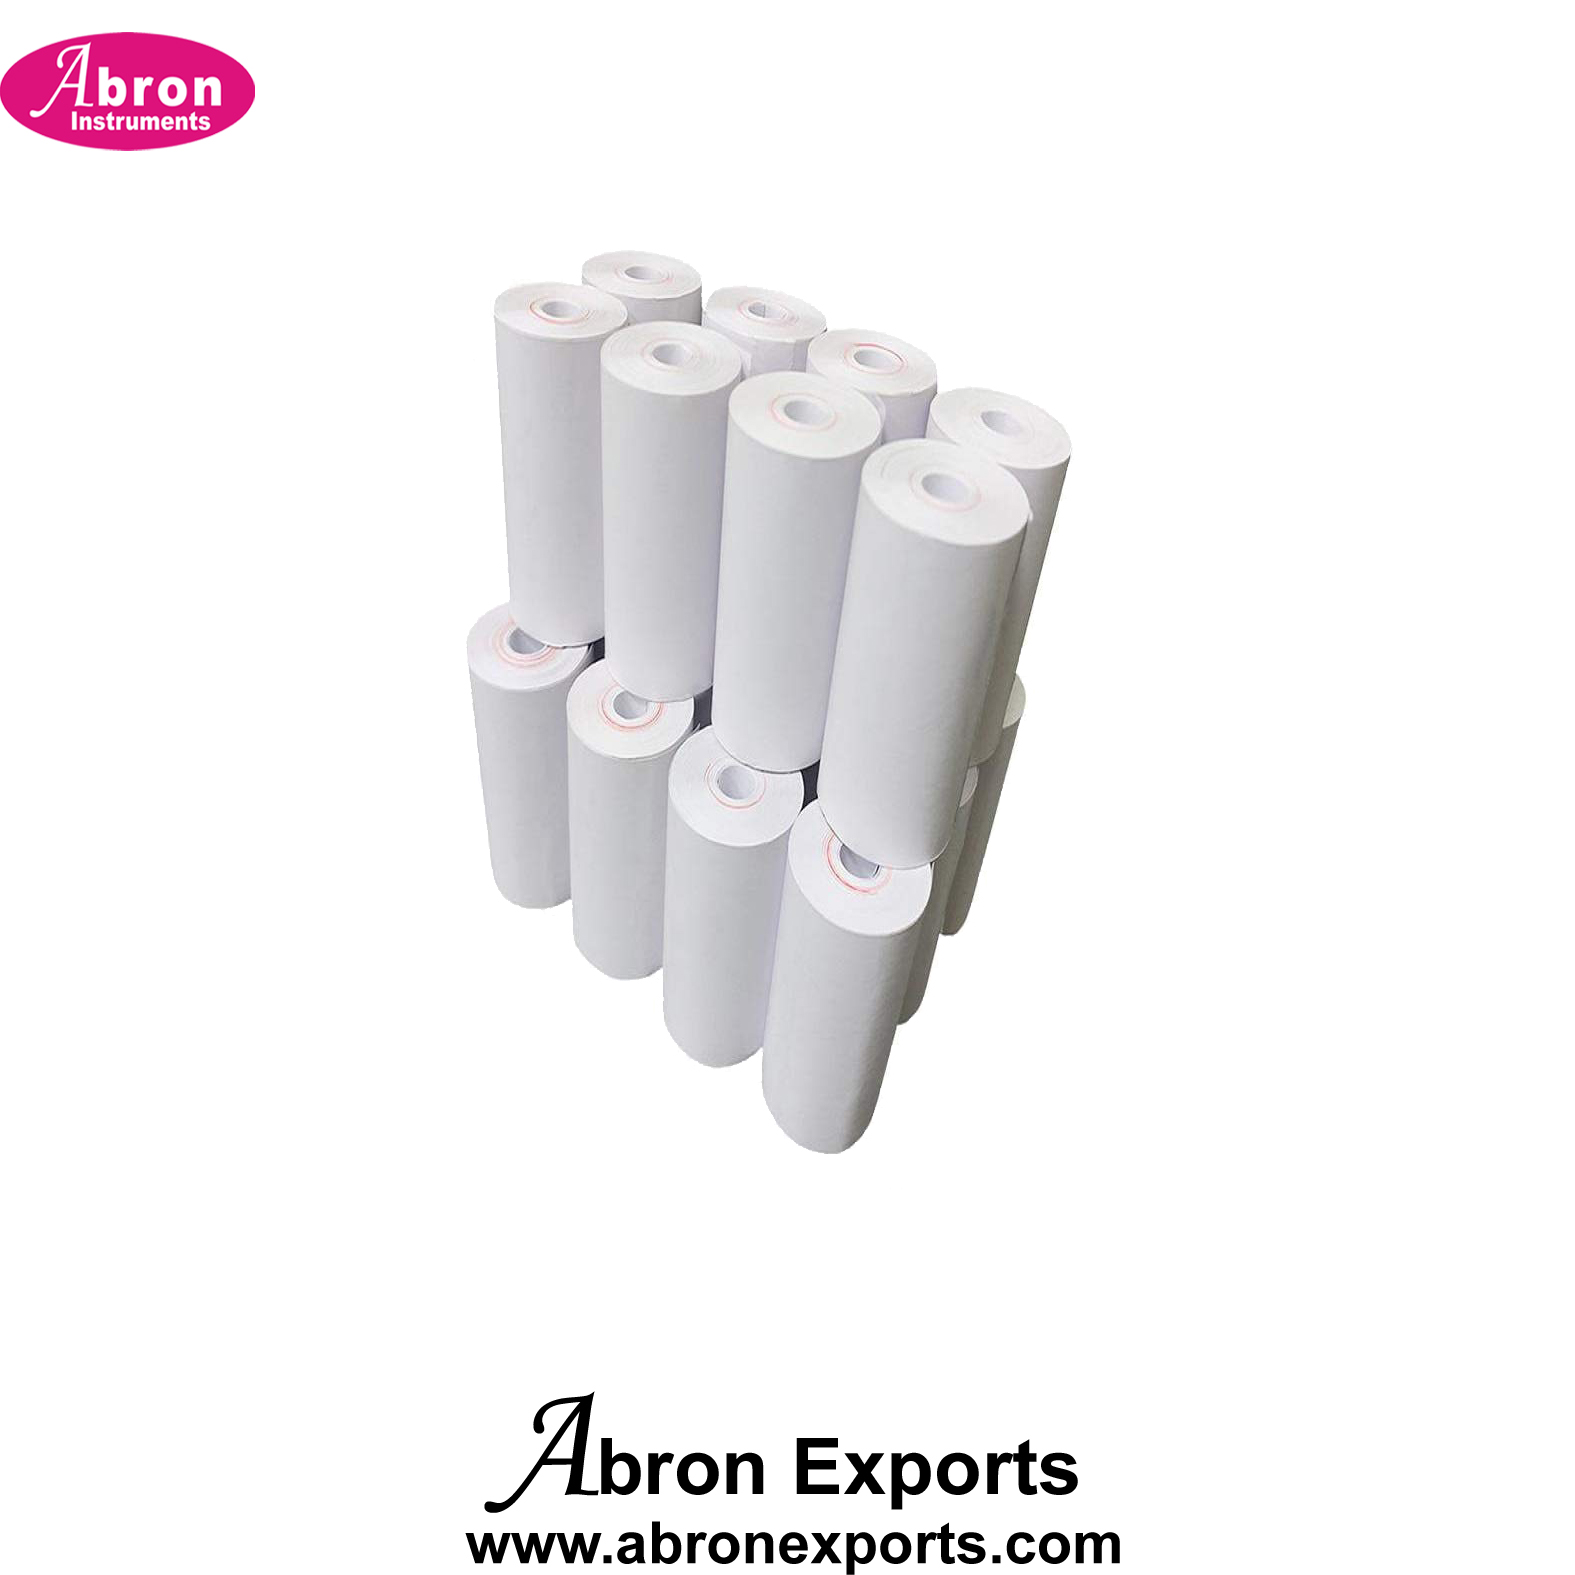 ECG Machine Thermal paper 110 mm 4 inch suitable for thermal 10 rolls Abron ABM-2501P